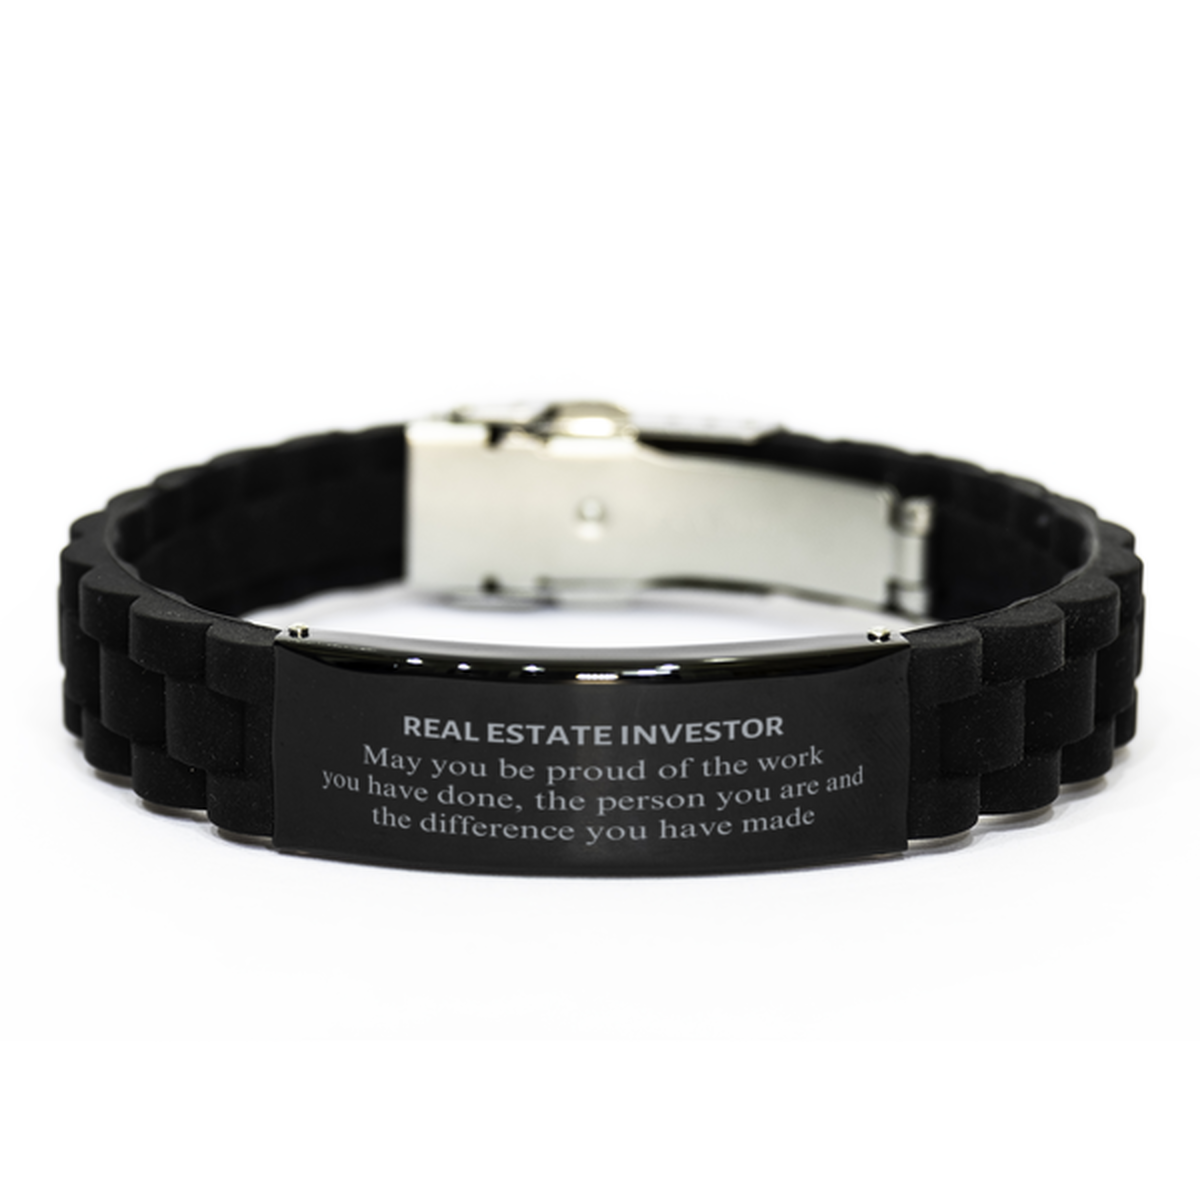 Real Estate Investor May you be proud of the work you have done, Retirement Real Estate Investor Black Glidelock Clasp Bracelet for Colleague Appreciation Gifts Amazing for Real Estate Investor